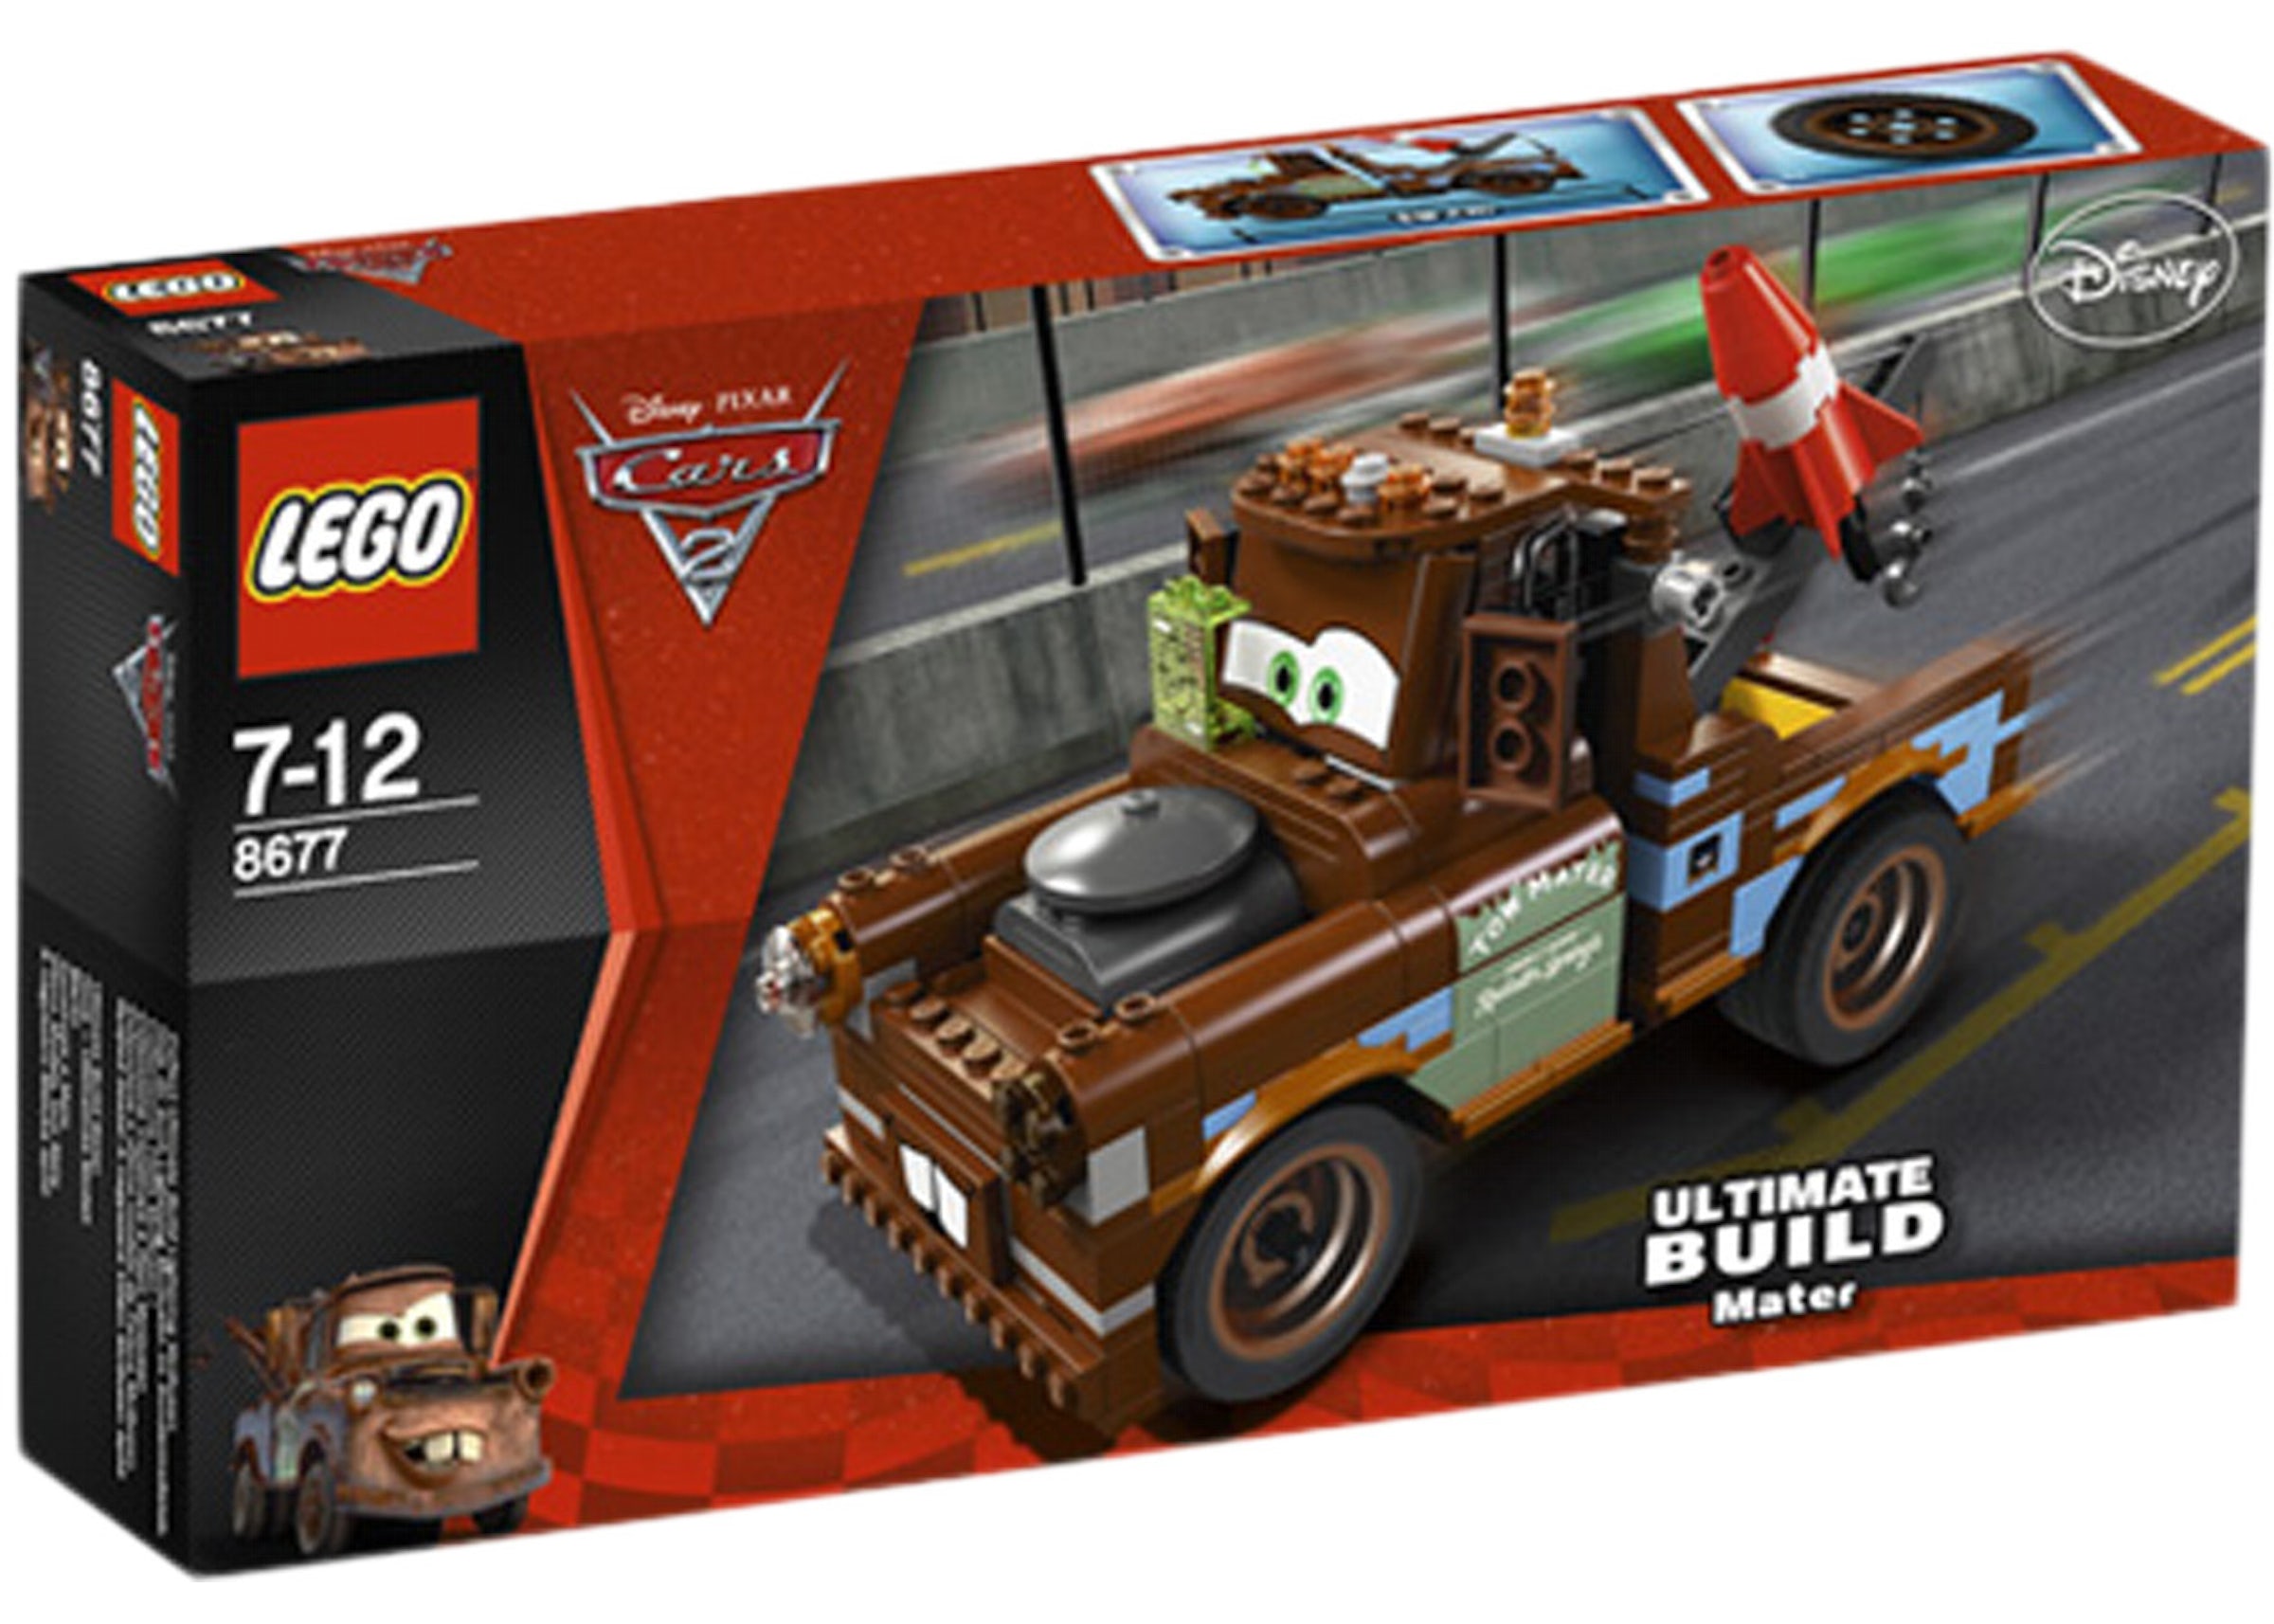 LEGO Cars 2 Ultimate Build Mater Set 8677 - IT